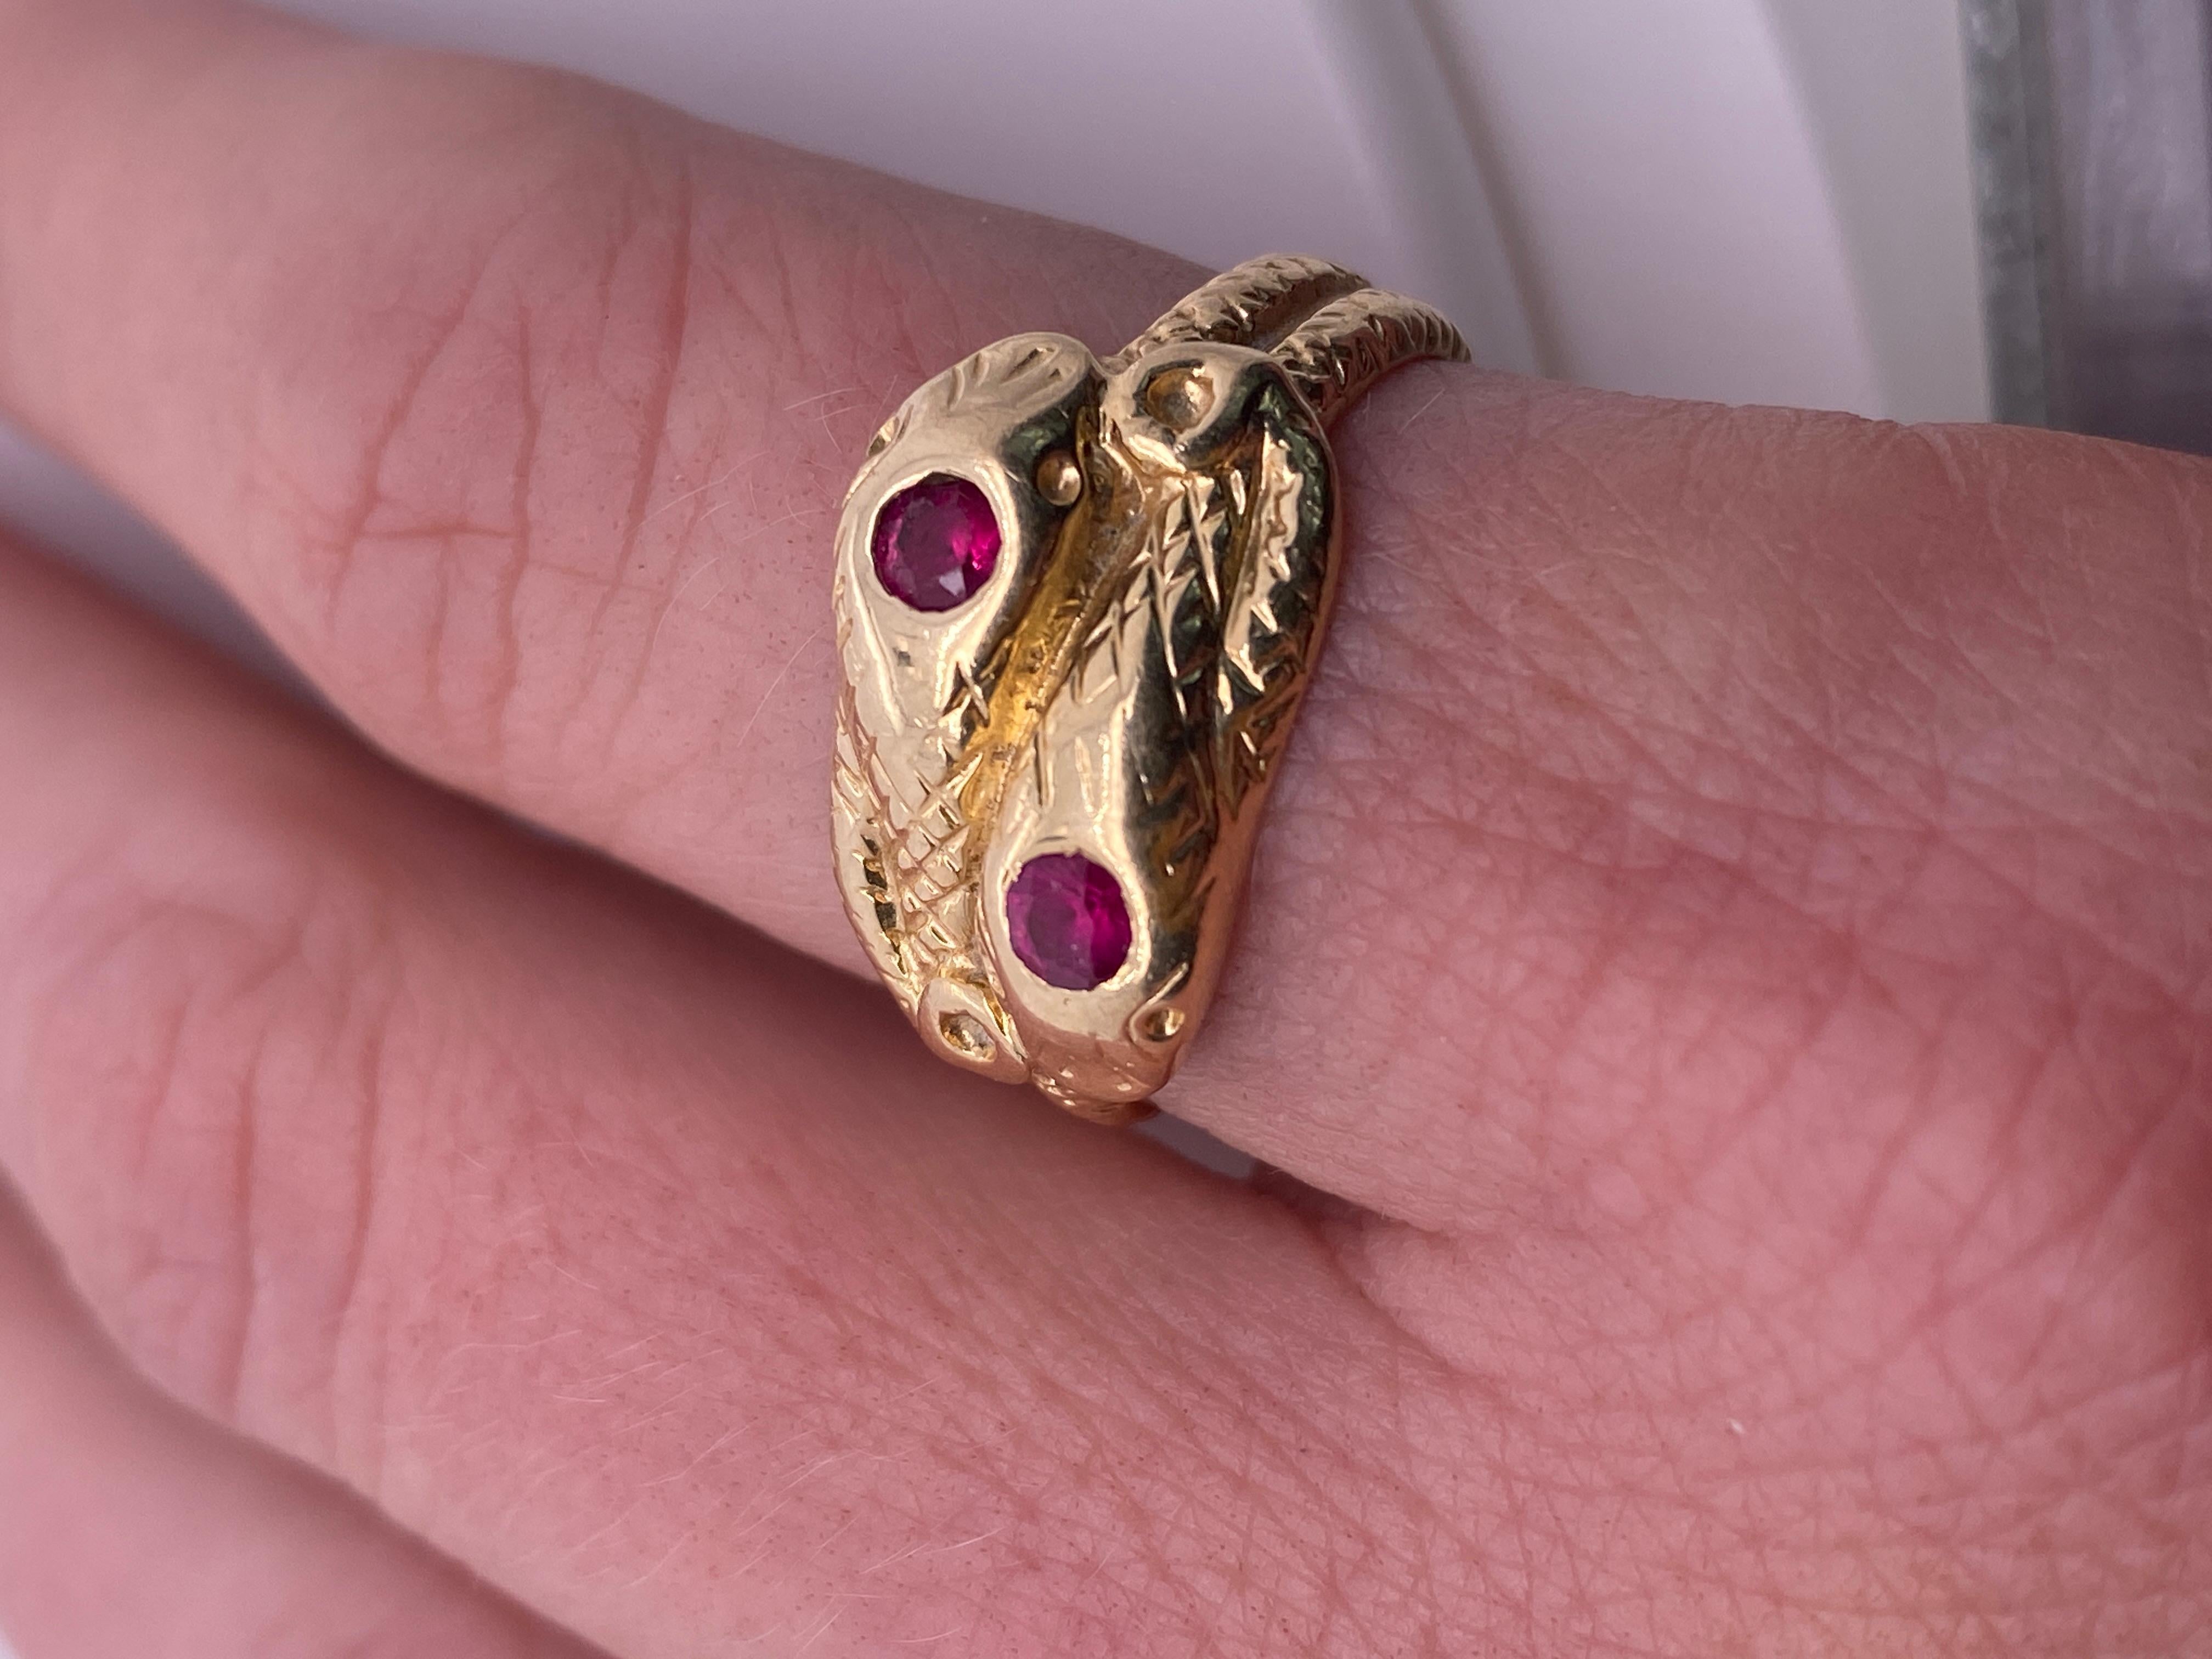 14kt Yellow Gold, Ruby Head, Textured Double Snake Ring, size 7 1/2. Features texture along top and sides. 